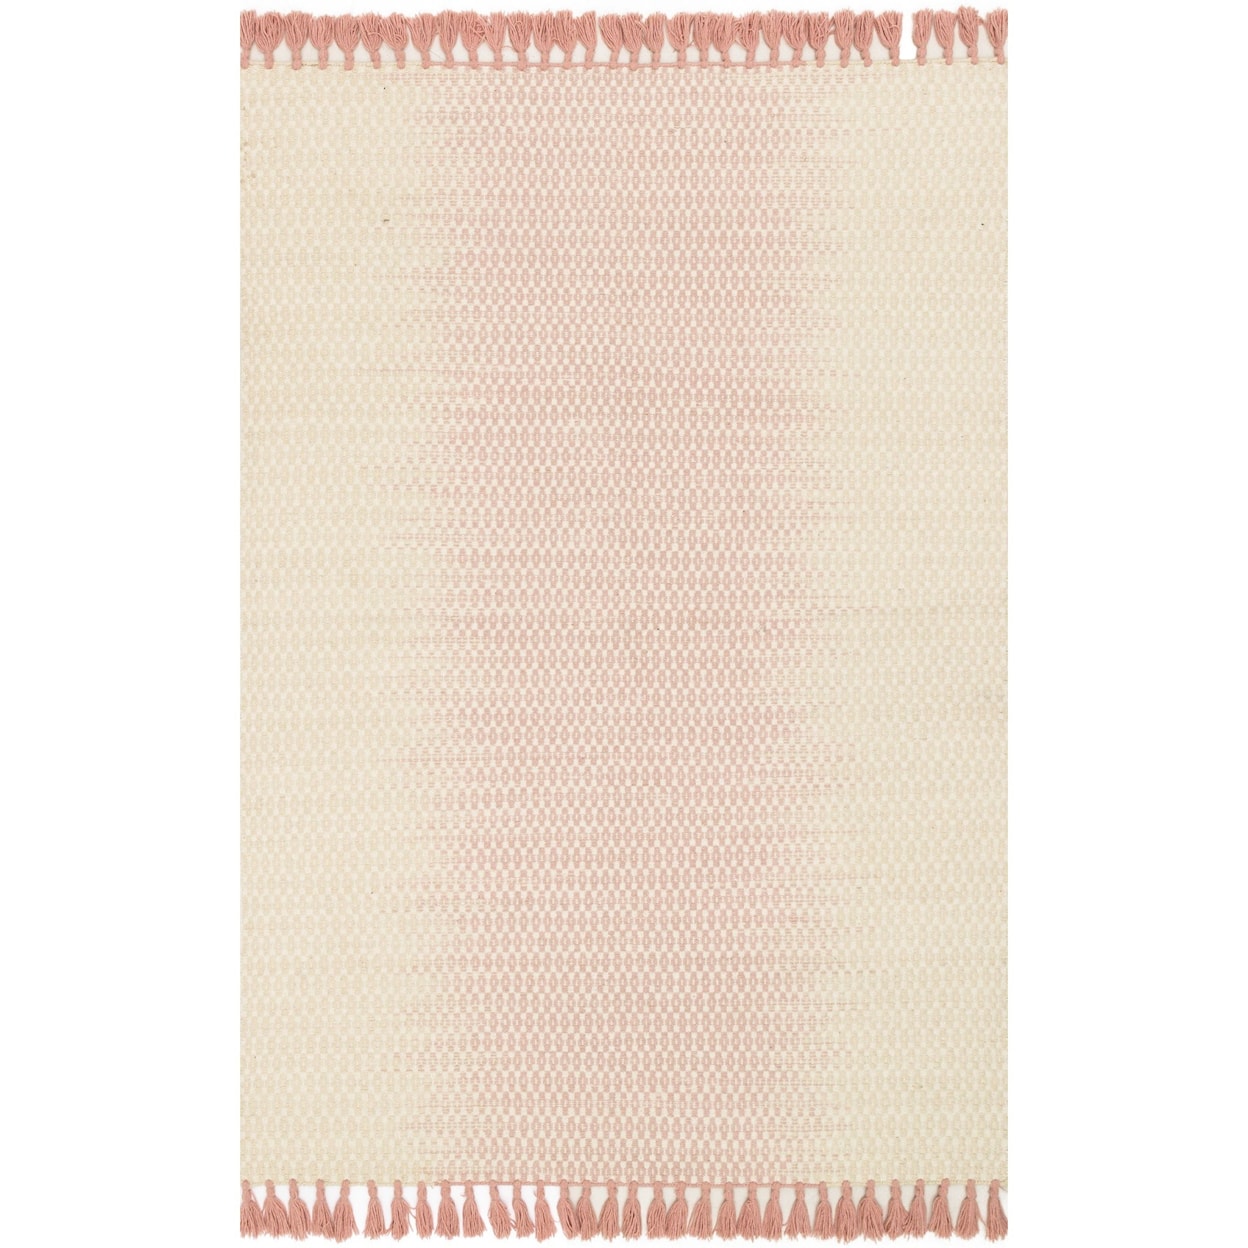 Magnolia Home by Joanna Gaines for Loloi Chantilly 5' 0" x 7' 6" Rectangle Rug